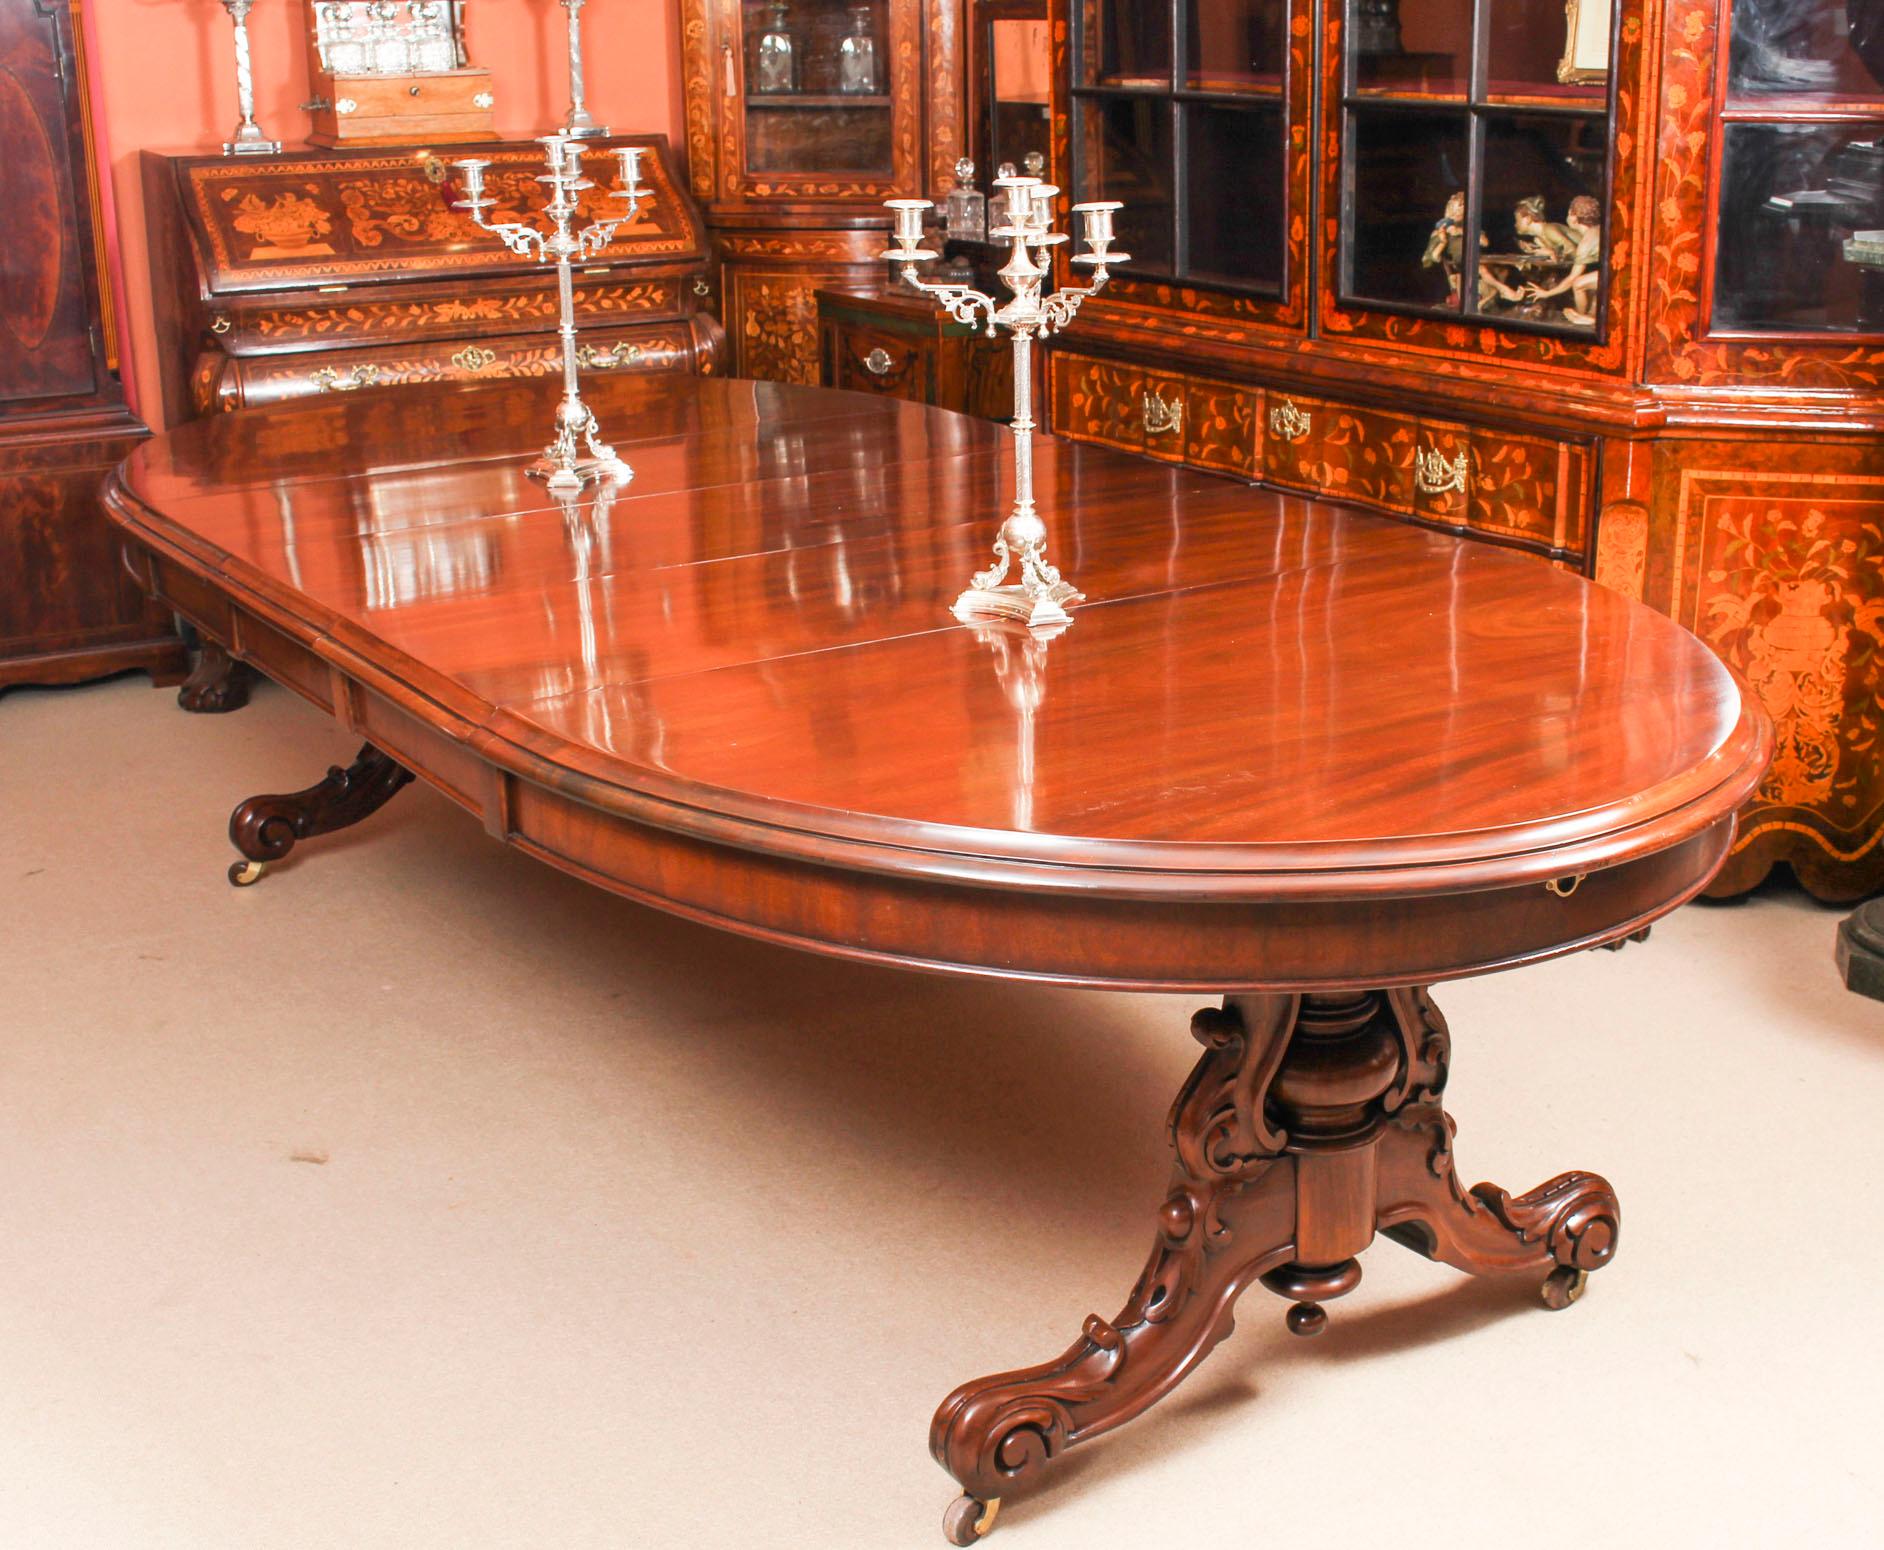 A fantastic antique Victorian mahogany twin pedestal base dining table which can seat ten diners in comfort and would also be ideal for use as a conference table, Circa 1865 in date.

The oval shaped table is made from solid mahogany and has three